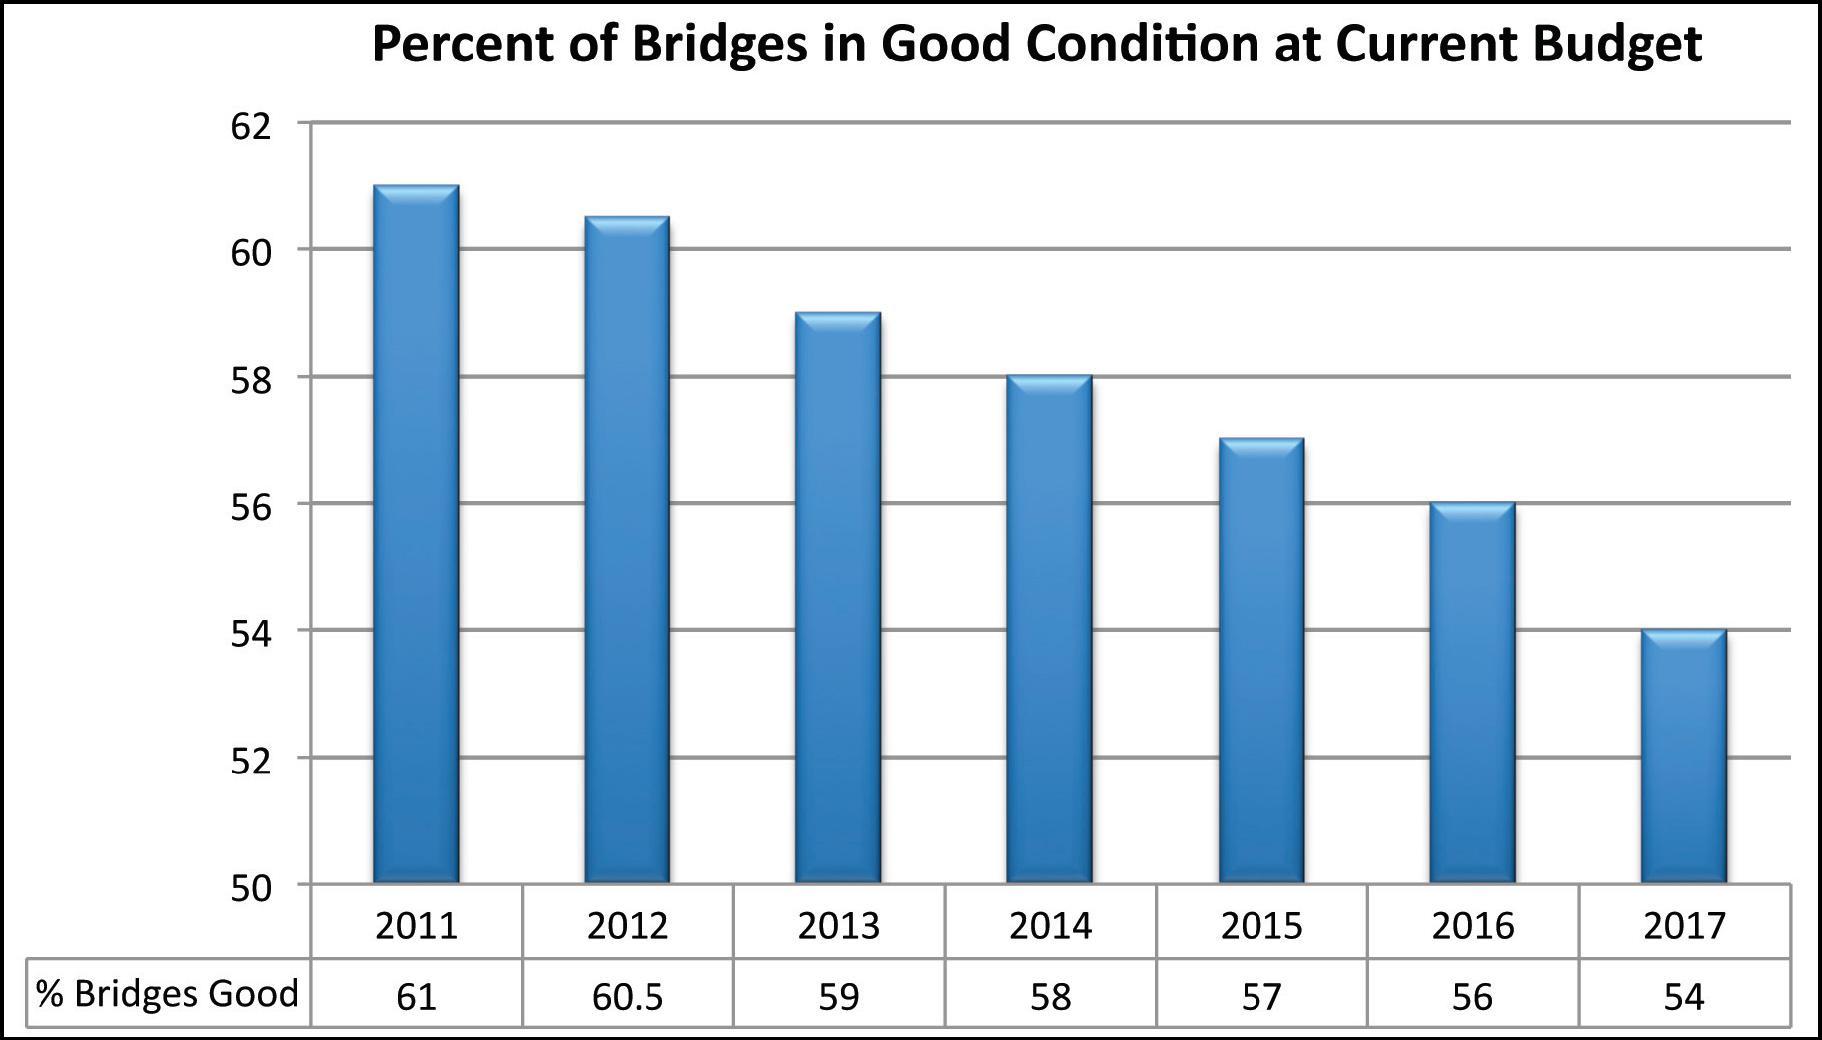 Figure 49 illustrates the percentage of bridge in good condition if the current budgeted amounts are continued annually through 2017 in North Carolina. The figure indicates that the percent of brdiges in good condition in 2011 is 61 percent and that will decline to 54 percent by 2017.